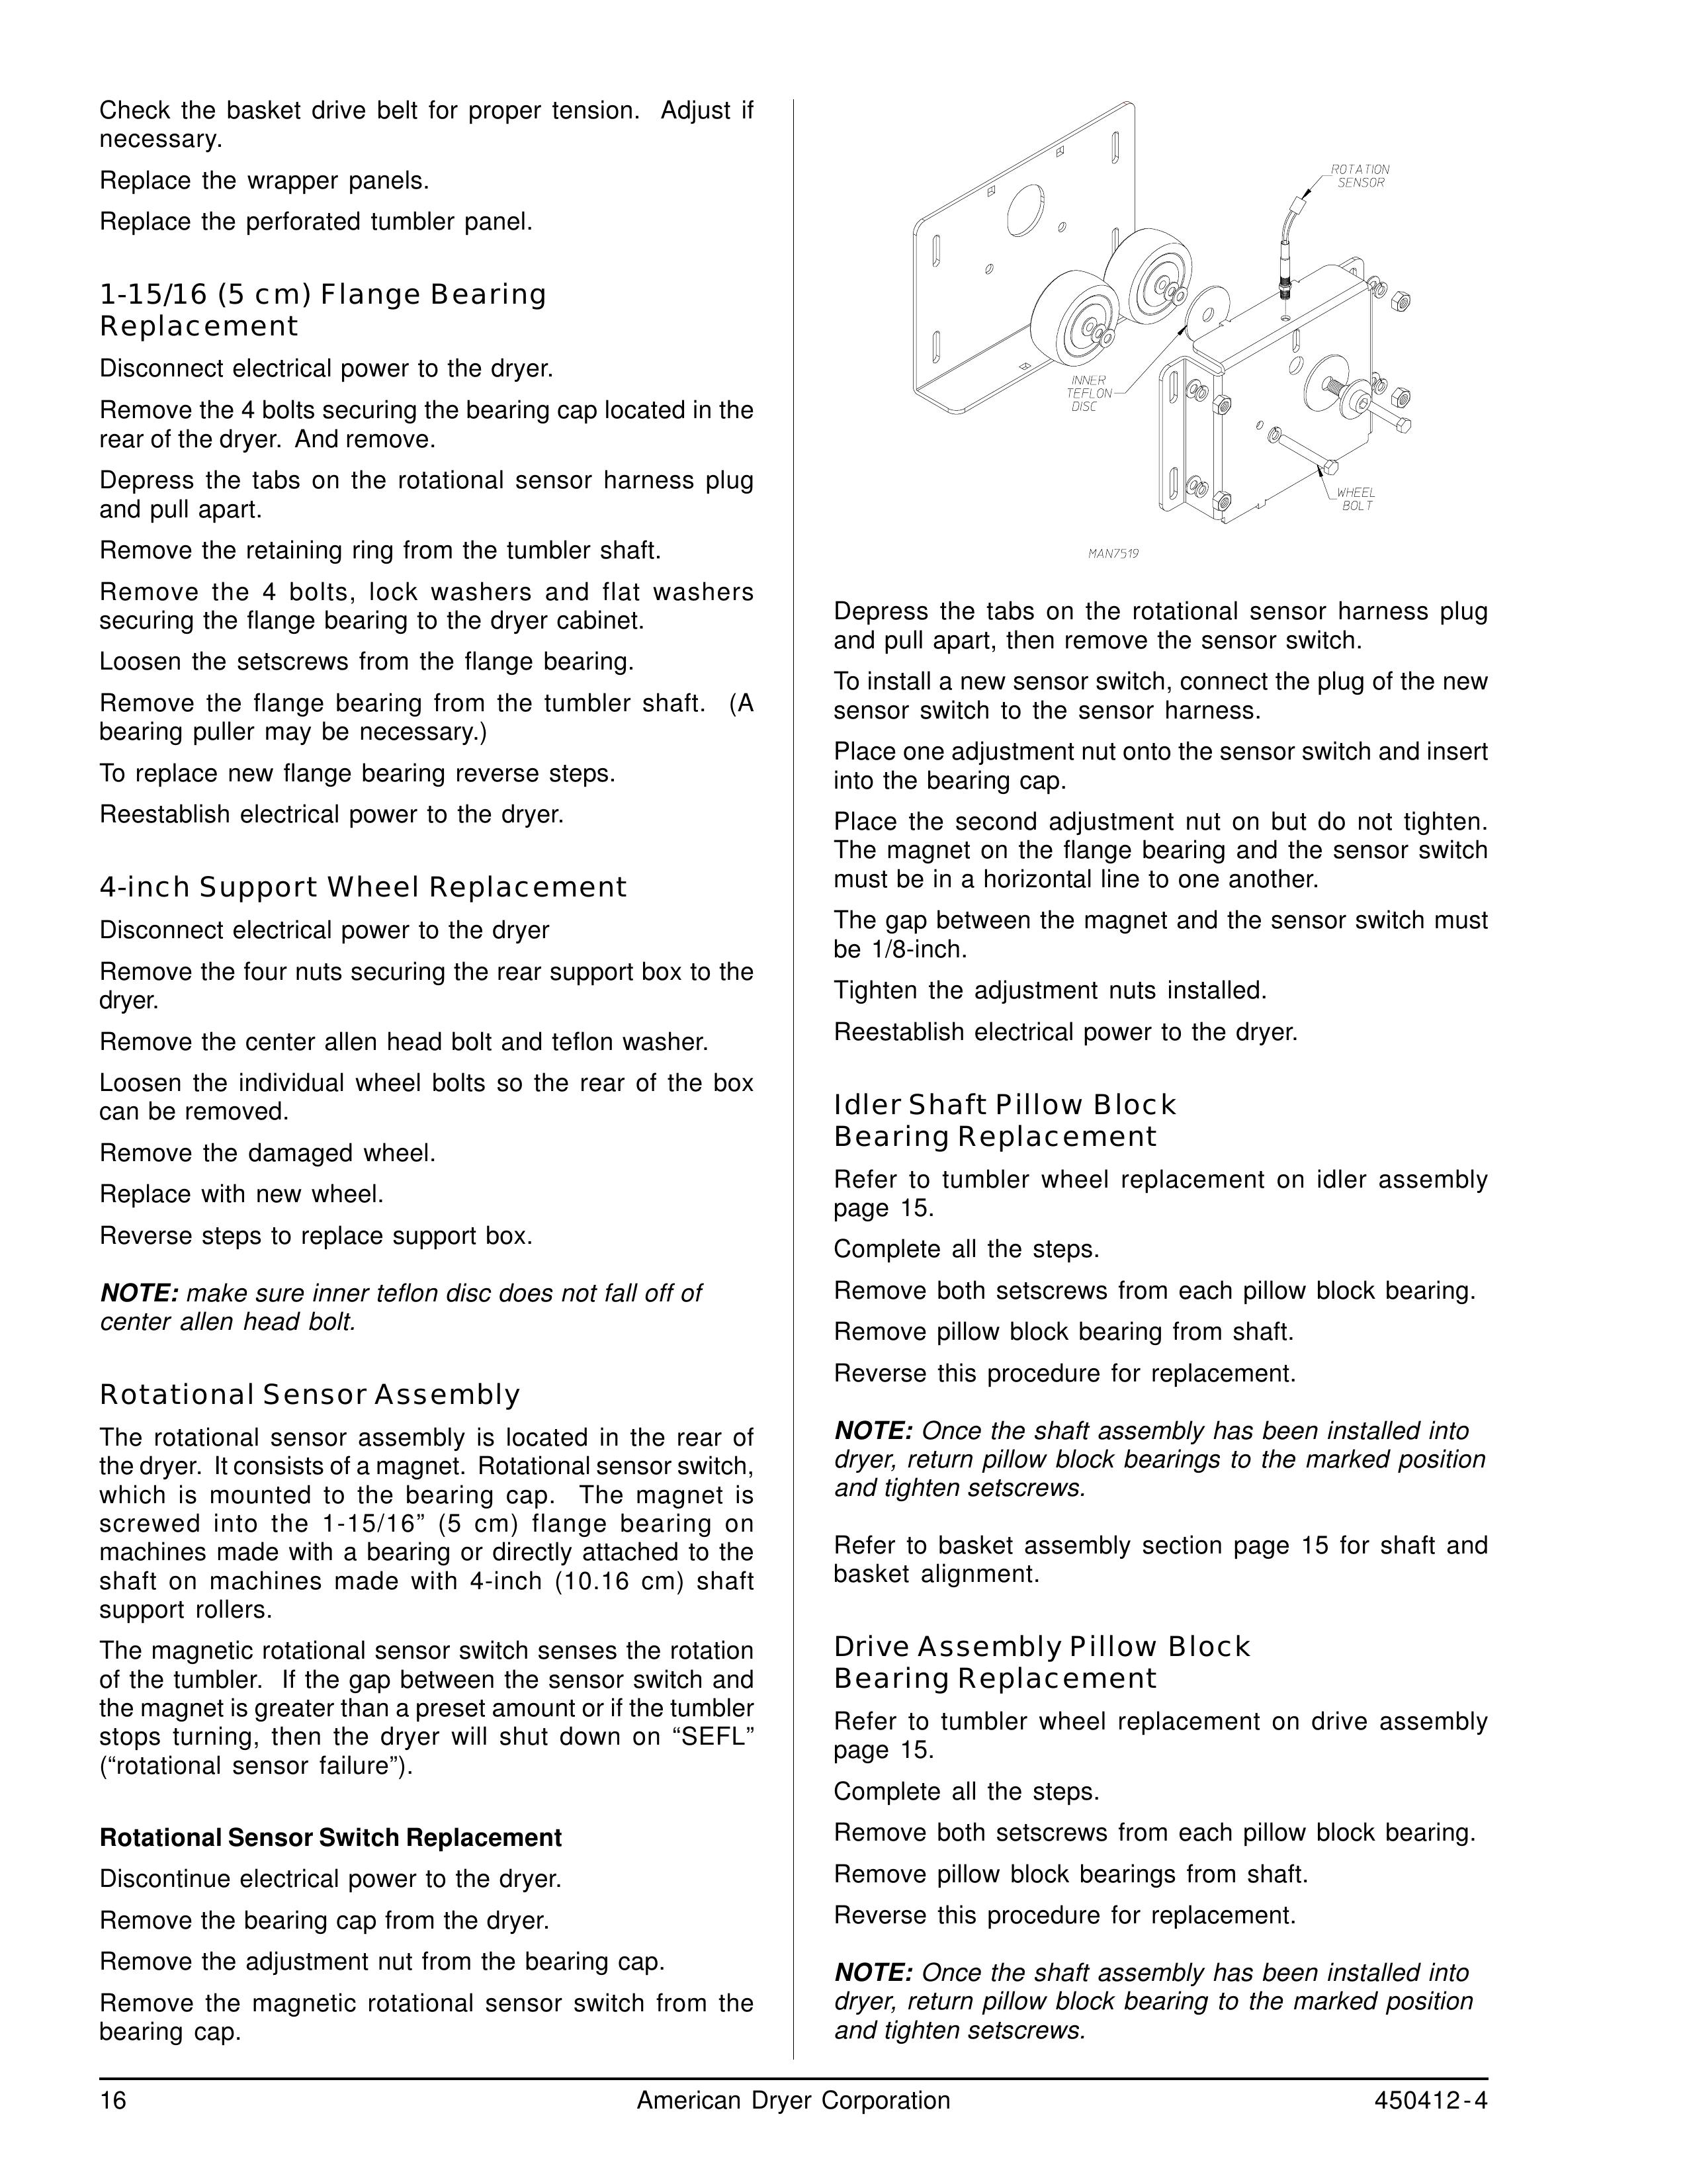 ADC ML-122 Clothes Dryer User Manual (Page 16)